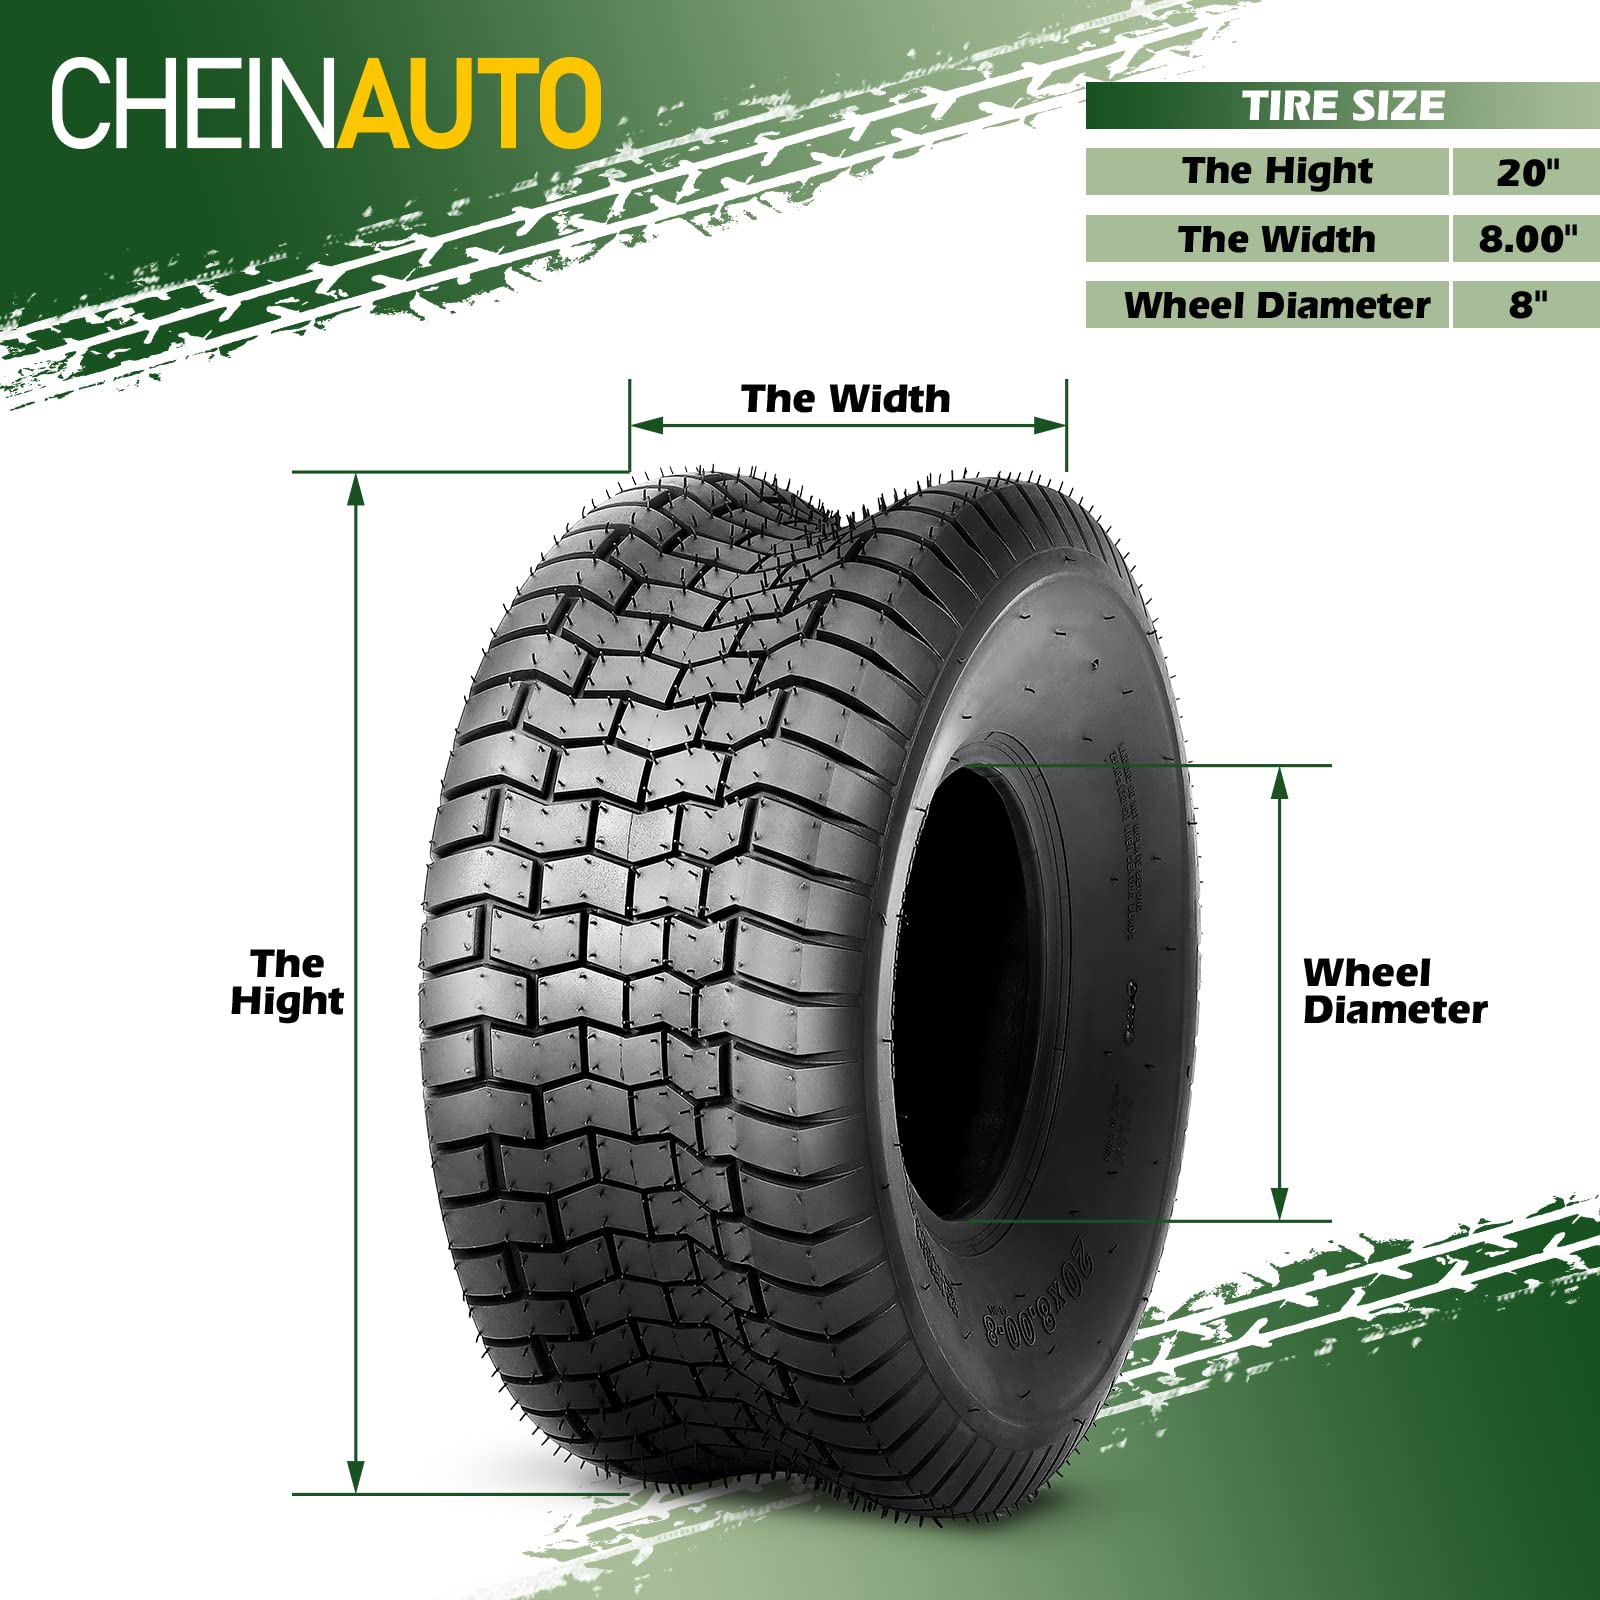 15x6.00-6 Lawn Mower Tire, 15x6x6 Tractor Turf Tire, 4 ply Tubeless, 565lbs Capacity, Set of 2